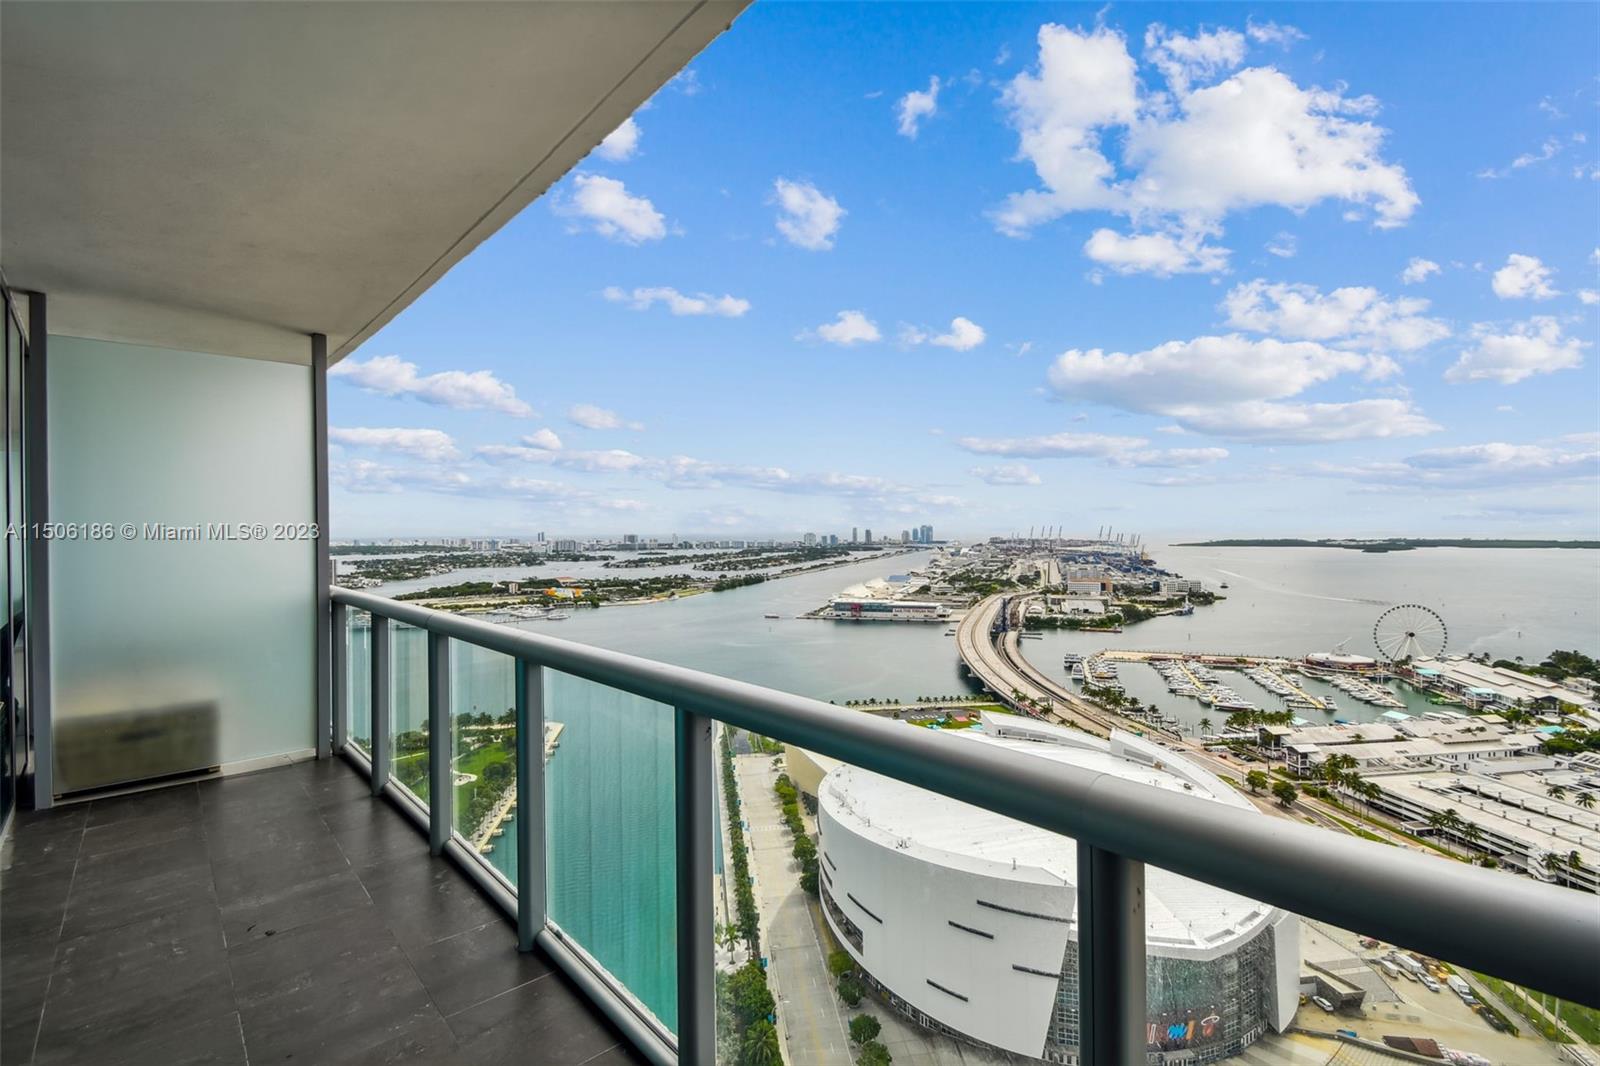 Incredible, unobstructed views of the Biscayne Bay and Downtown skyline from the 41st floor of Marina Blue. Slate tile floors throughout, blackout shades, custom closets in both bedrooms, and an extended kitchen bar area for practical dining. Master Bathroom has two sinks for convenience and storage, as well as a walk in standing shower and bath tub. Grand foyer entrance allows for privacy and the ability to customize the feng-shui of your condo from first sight. Marina Blue has two pools, huge fitness center, volleyball court, bbq area. Assigned parking space + storage space included, as well as internet and cable. Walk to Miami Worldcenter's retail and fine dining like Brasserie Laurel, Heat Arena, Perez Art Museum, Frost Science Museum. Ready to move in! Freshly painted.